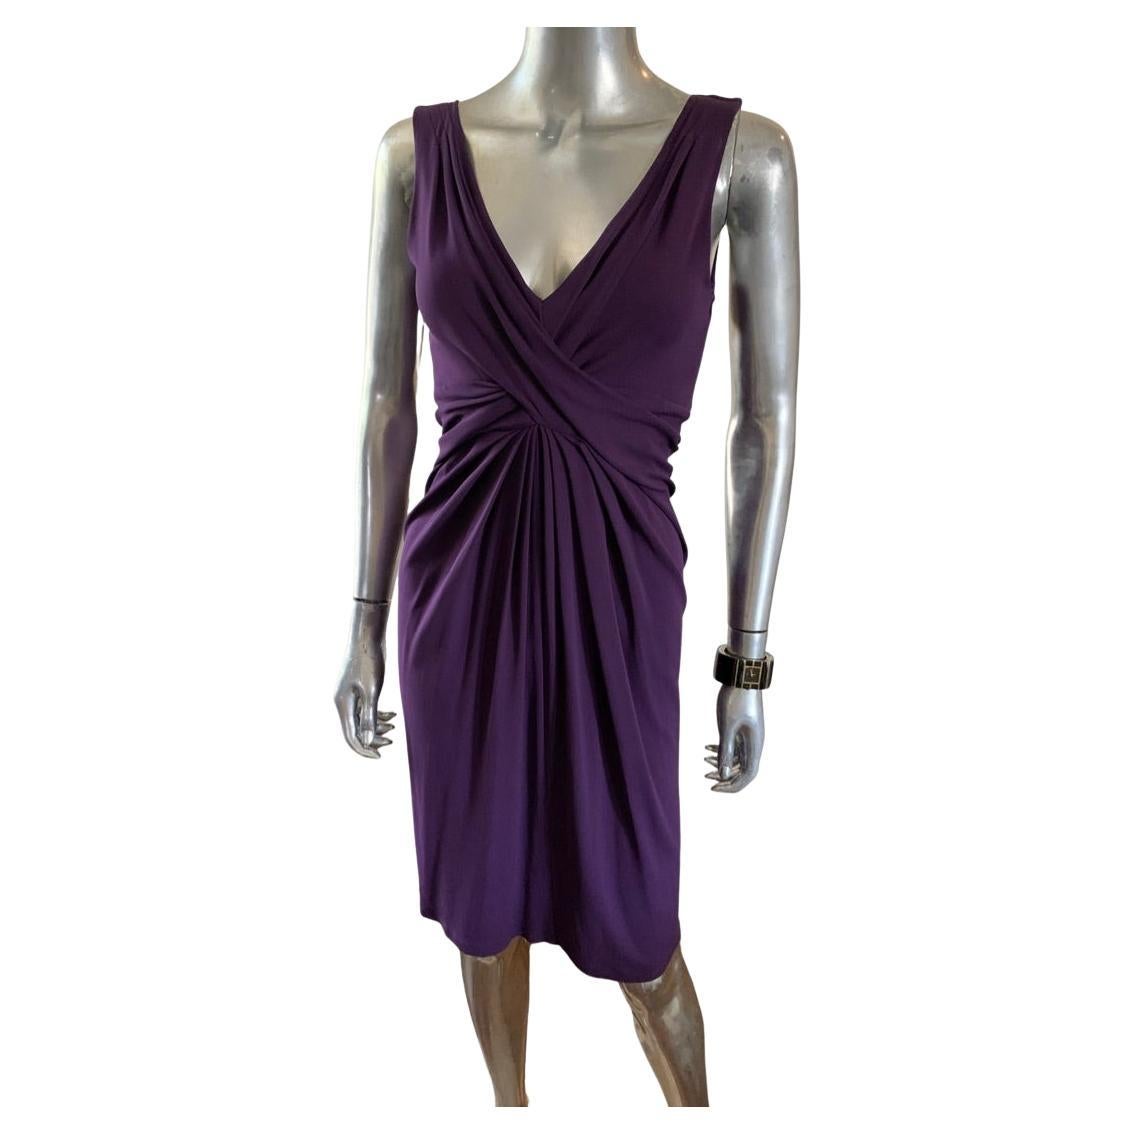 Michael Kors Collection, Italy Purple Jersey Halter Draped Dress Size 4